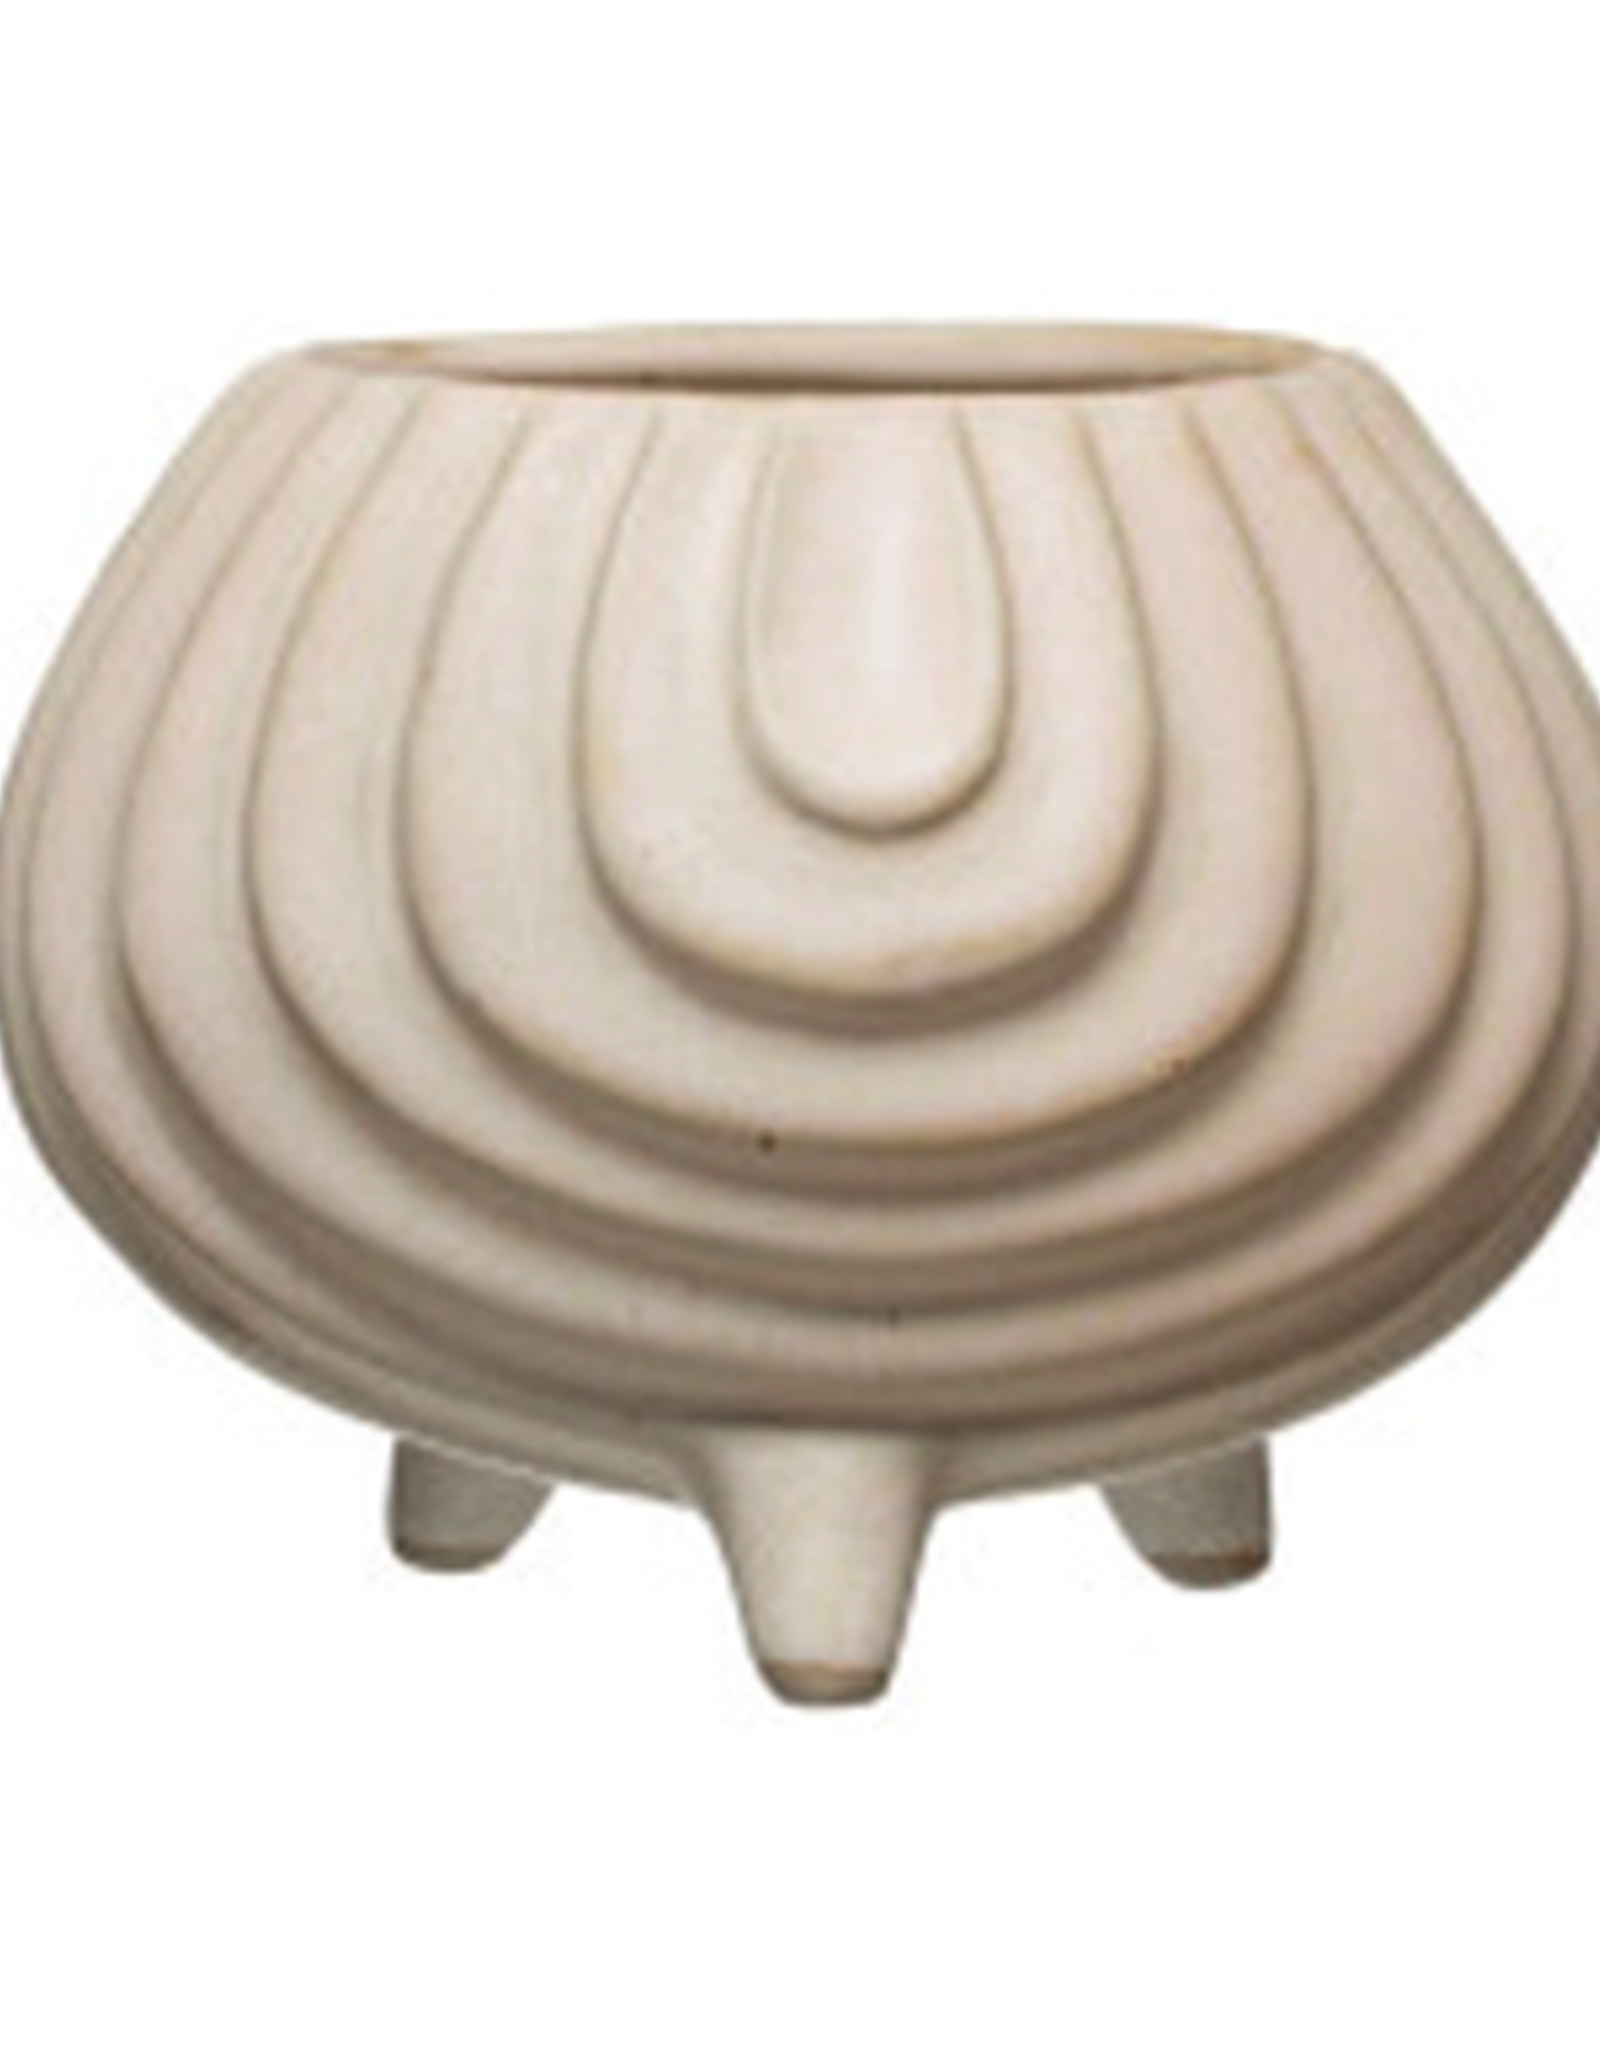 White Stoneware with Debossed Curves Footed Planter H4"